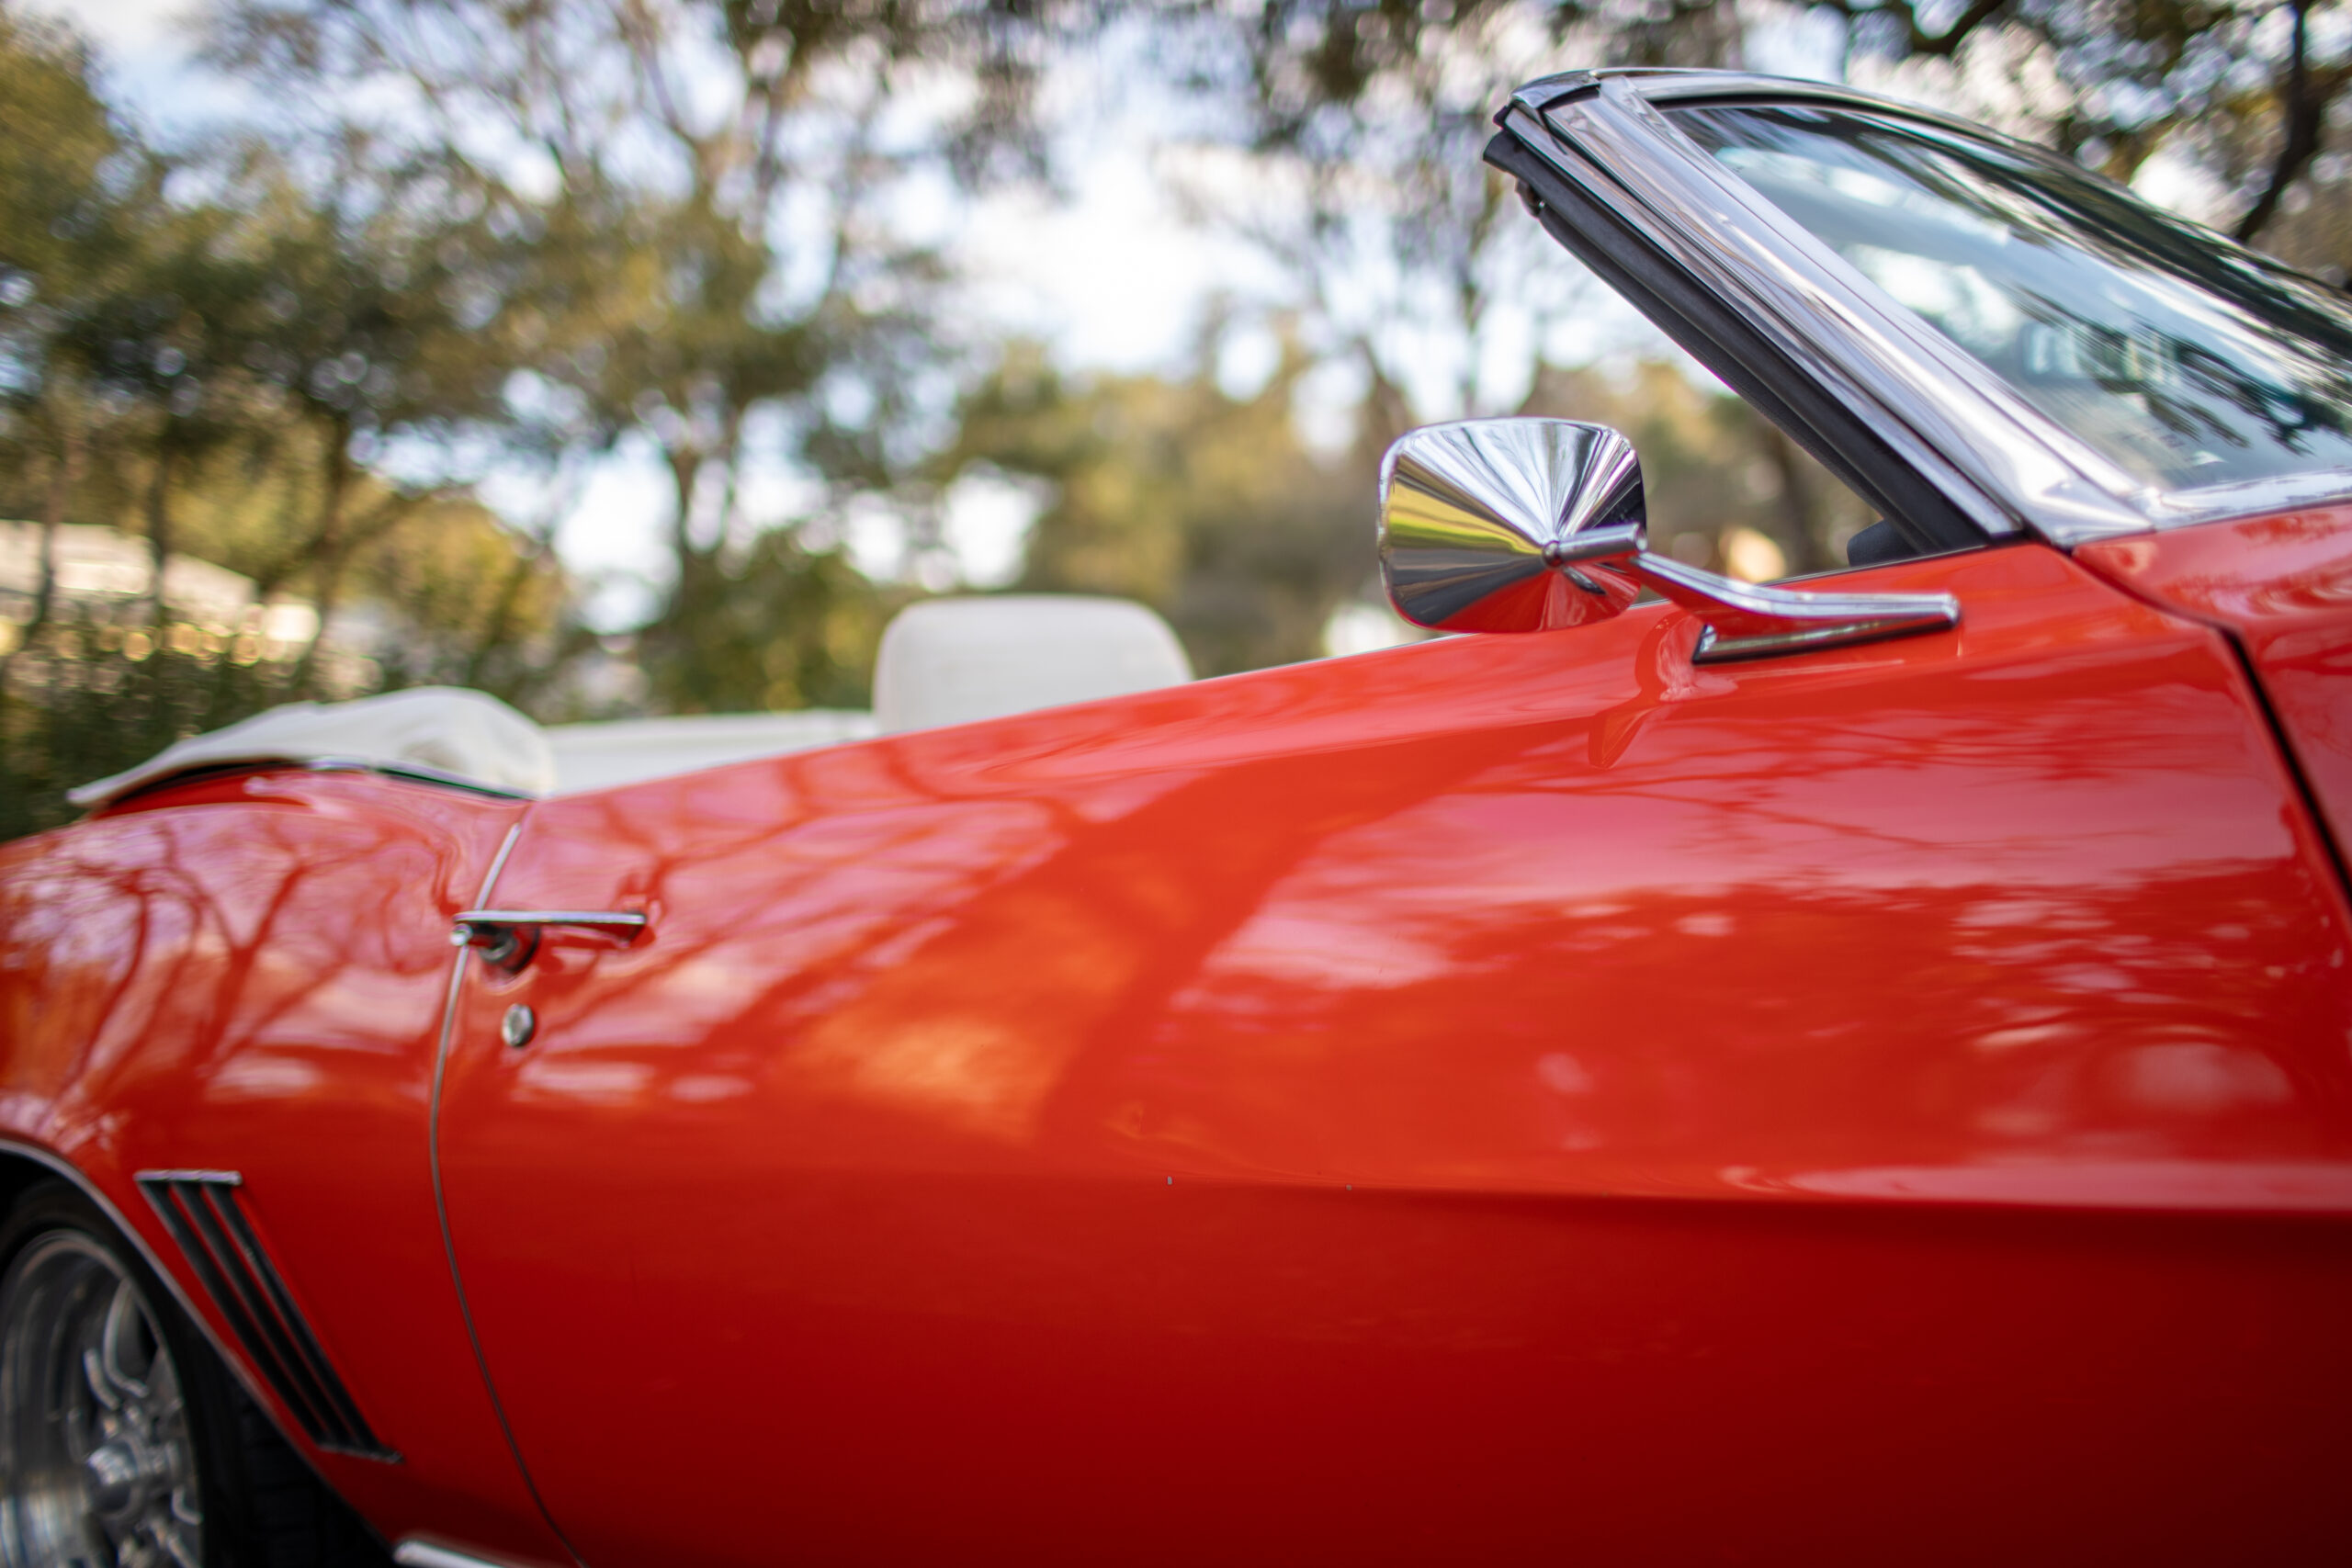 Close-up of a red convertible car with the top down, parked outdoors. Trees and foliage are visible in the blurred background.